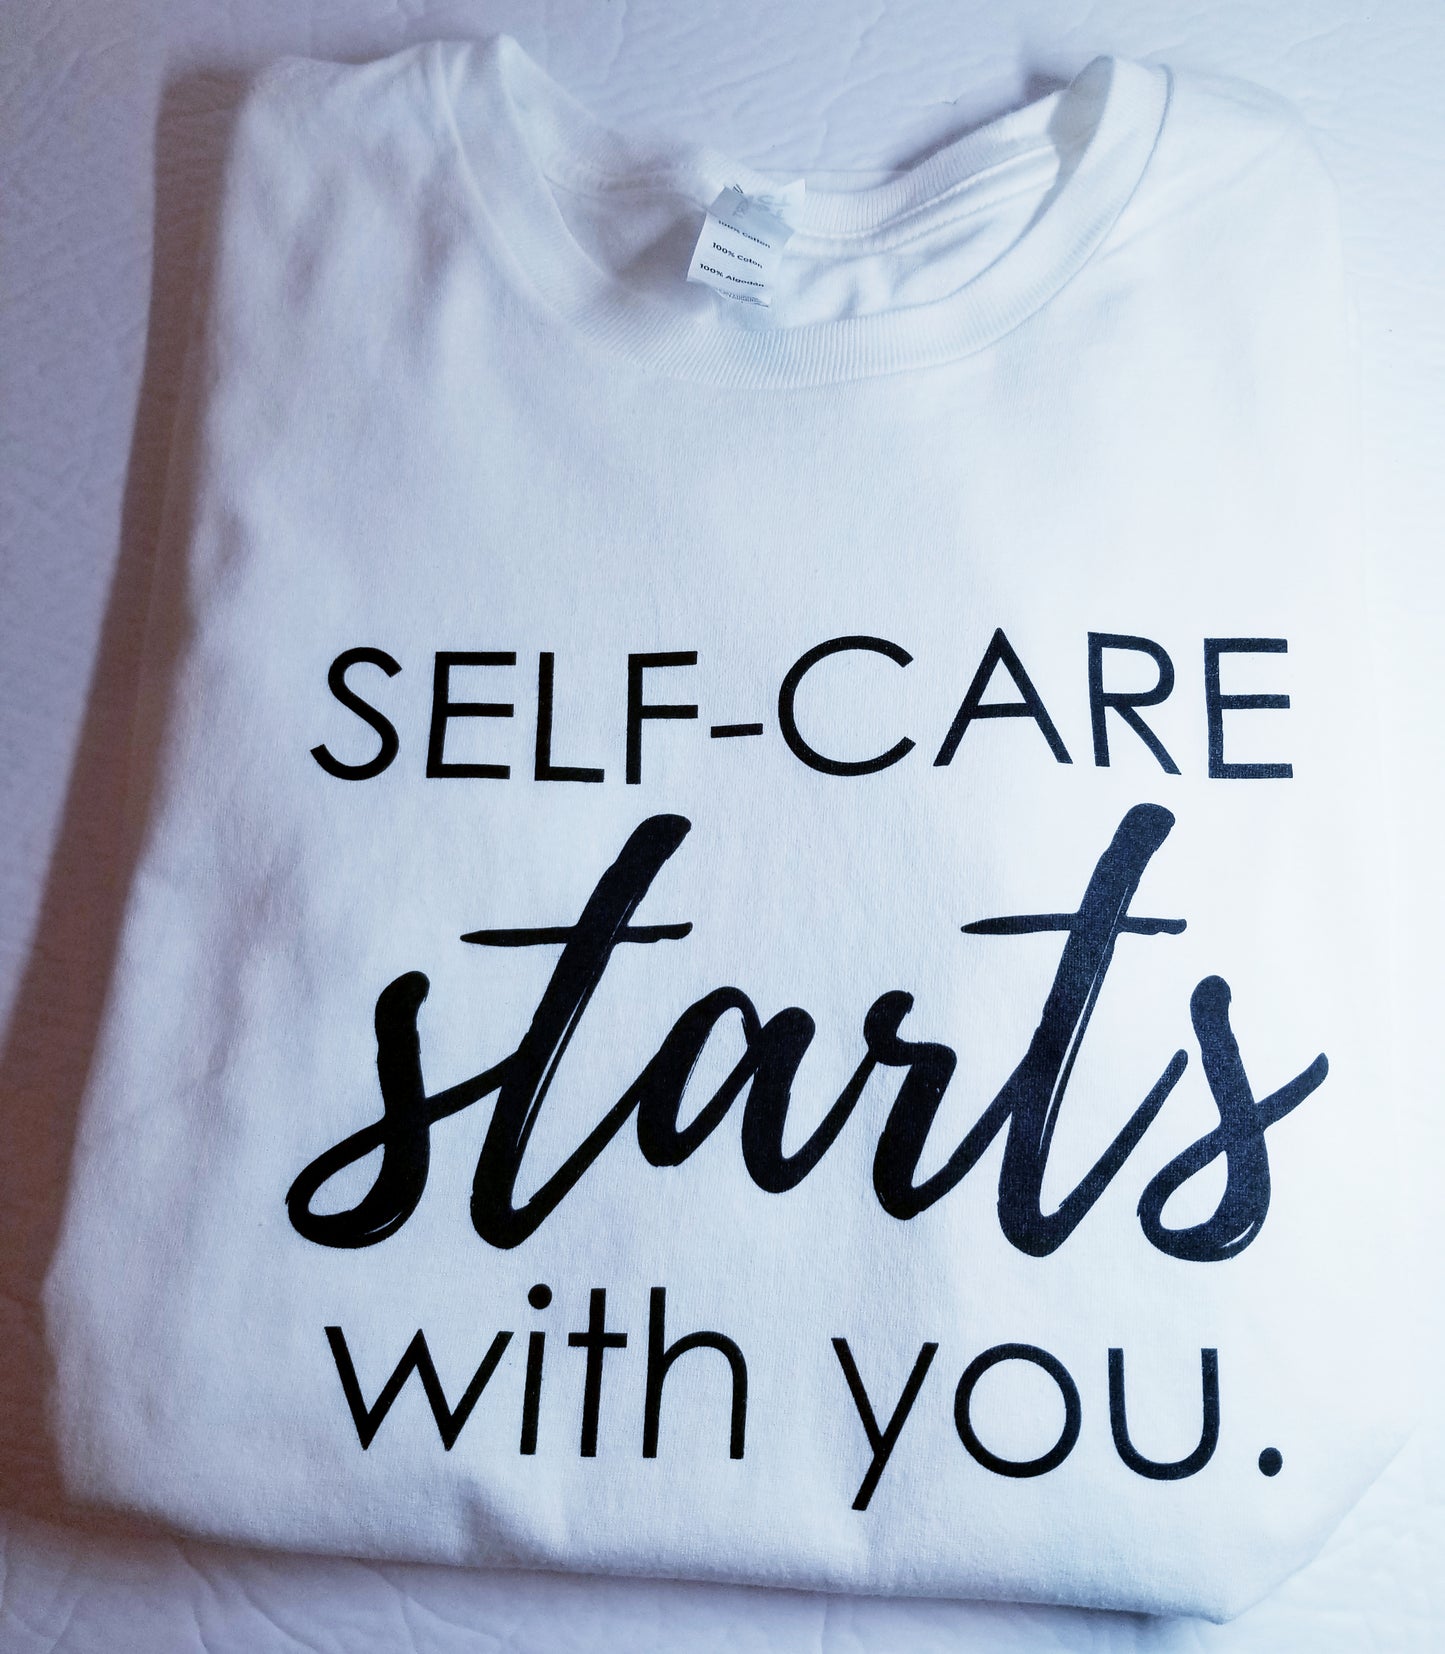 Self-care starts with you T-shirt